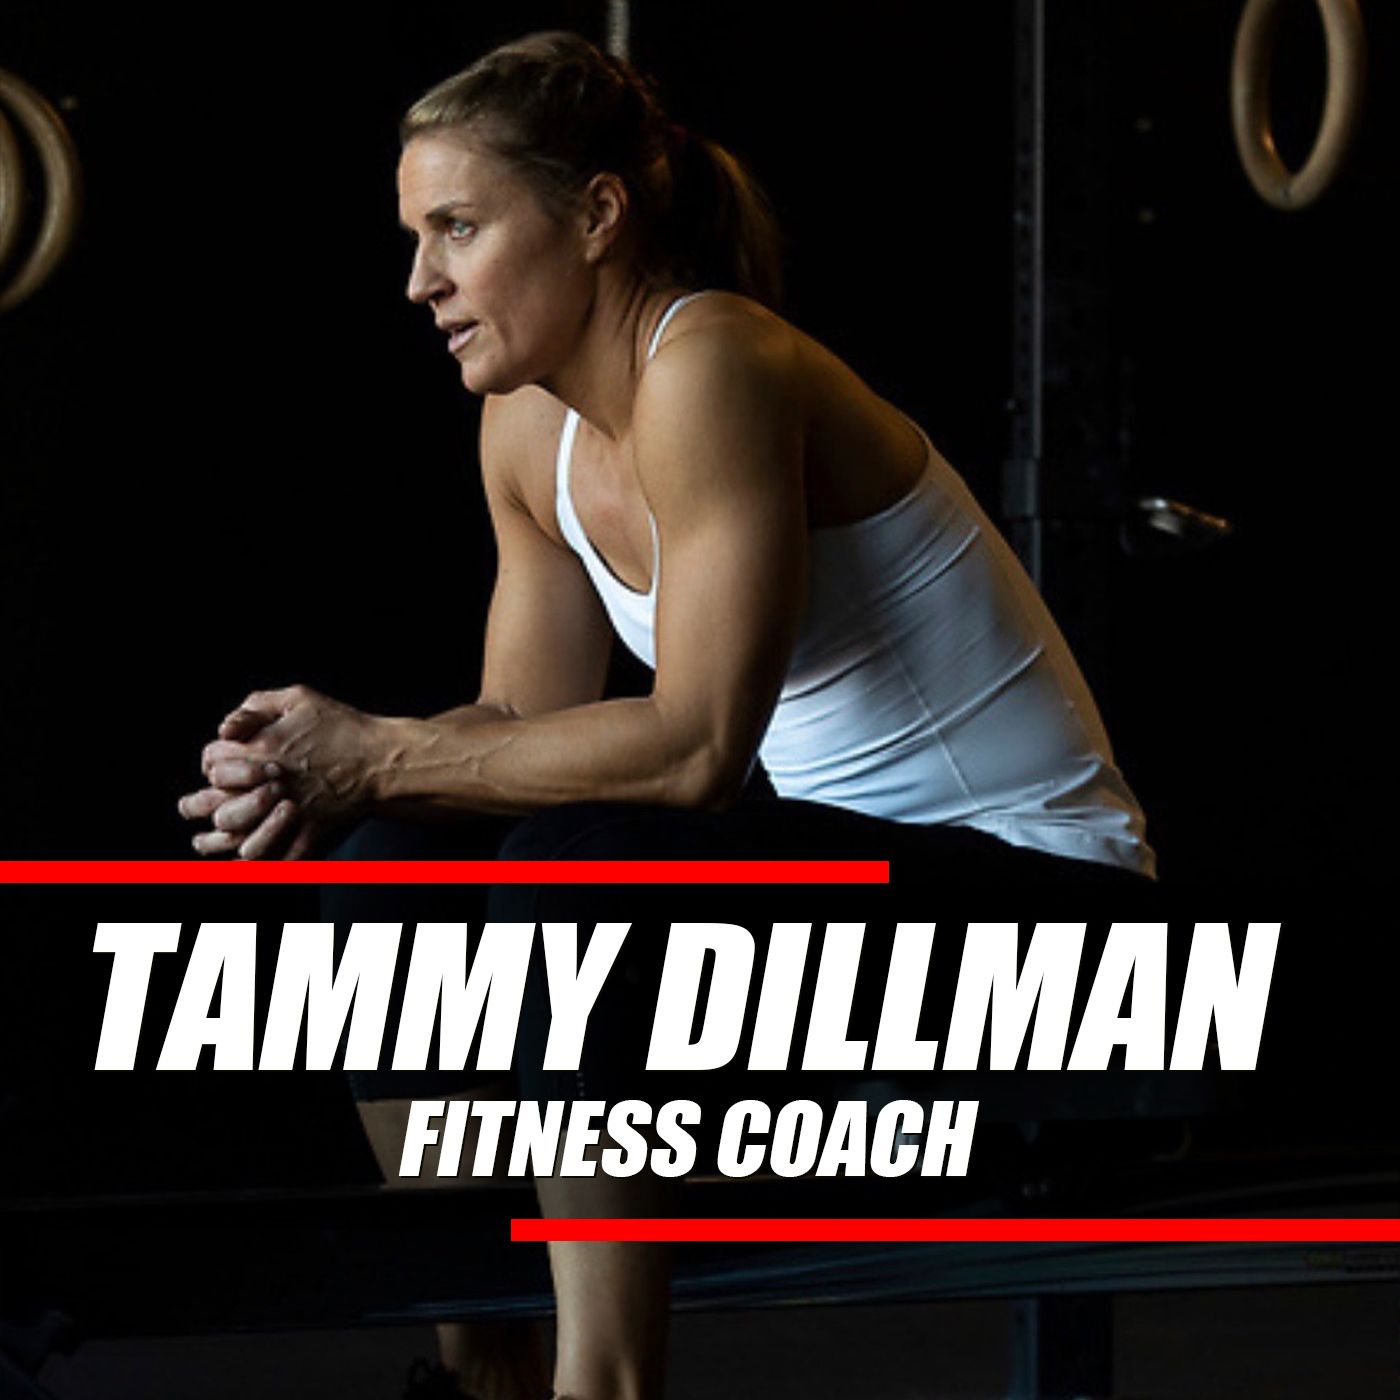 Its About Having People Reach Their Goals | Tammy Dillman - Fitness Coach